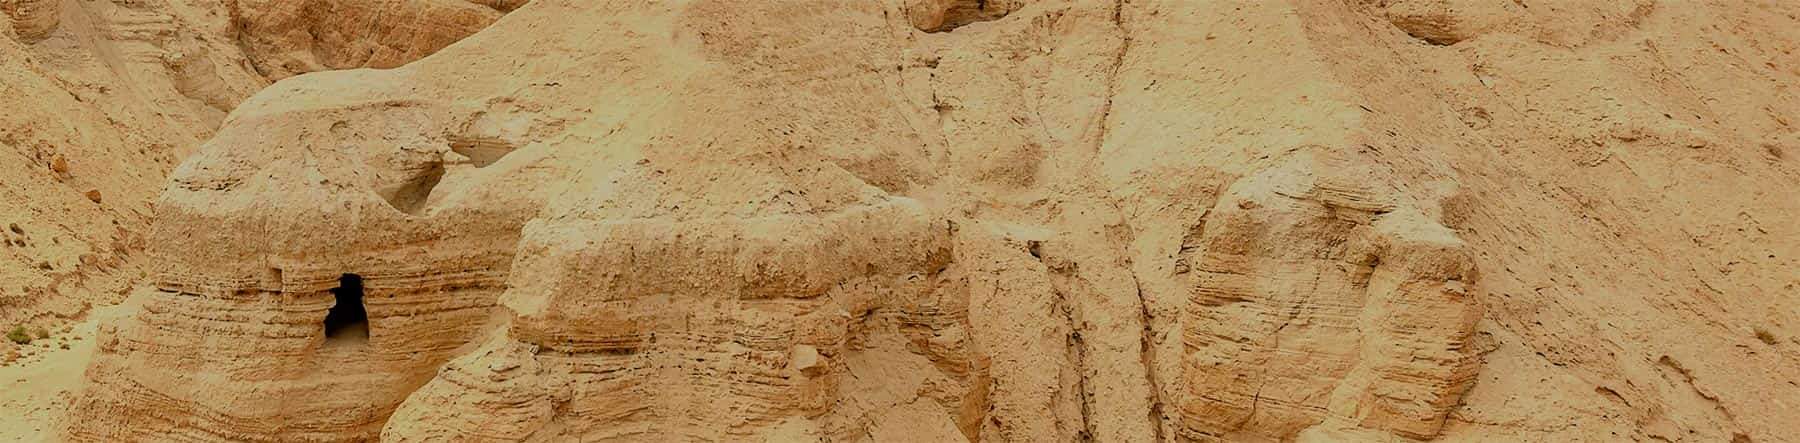 Science Shepherd Unearthing the Bible Homeschool Curriculum cave at Qumran